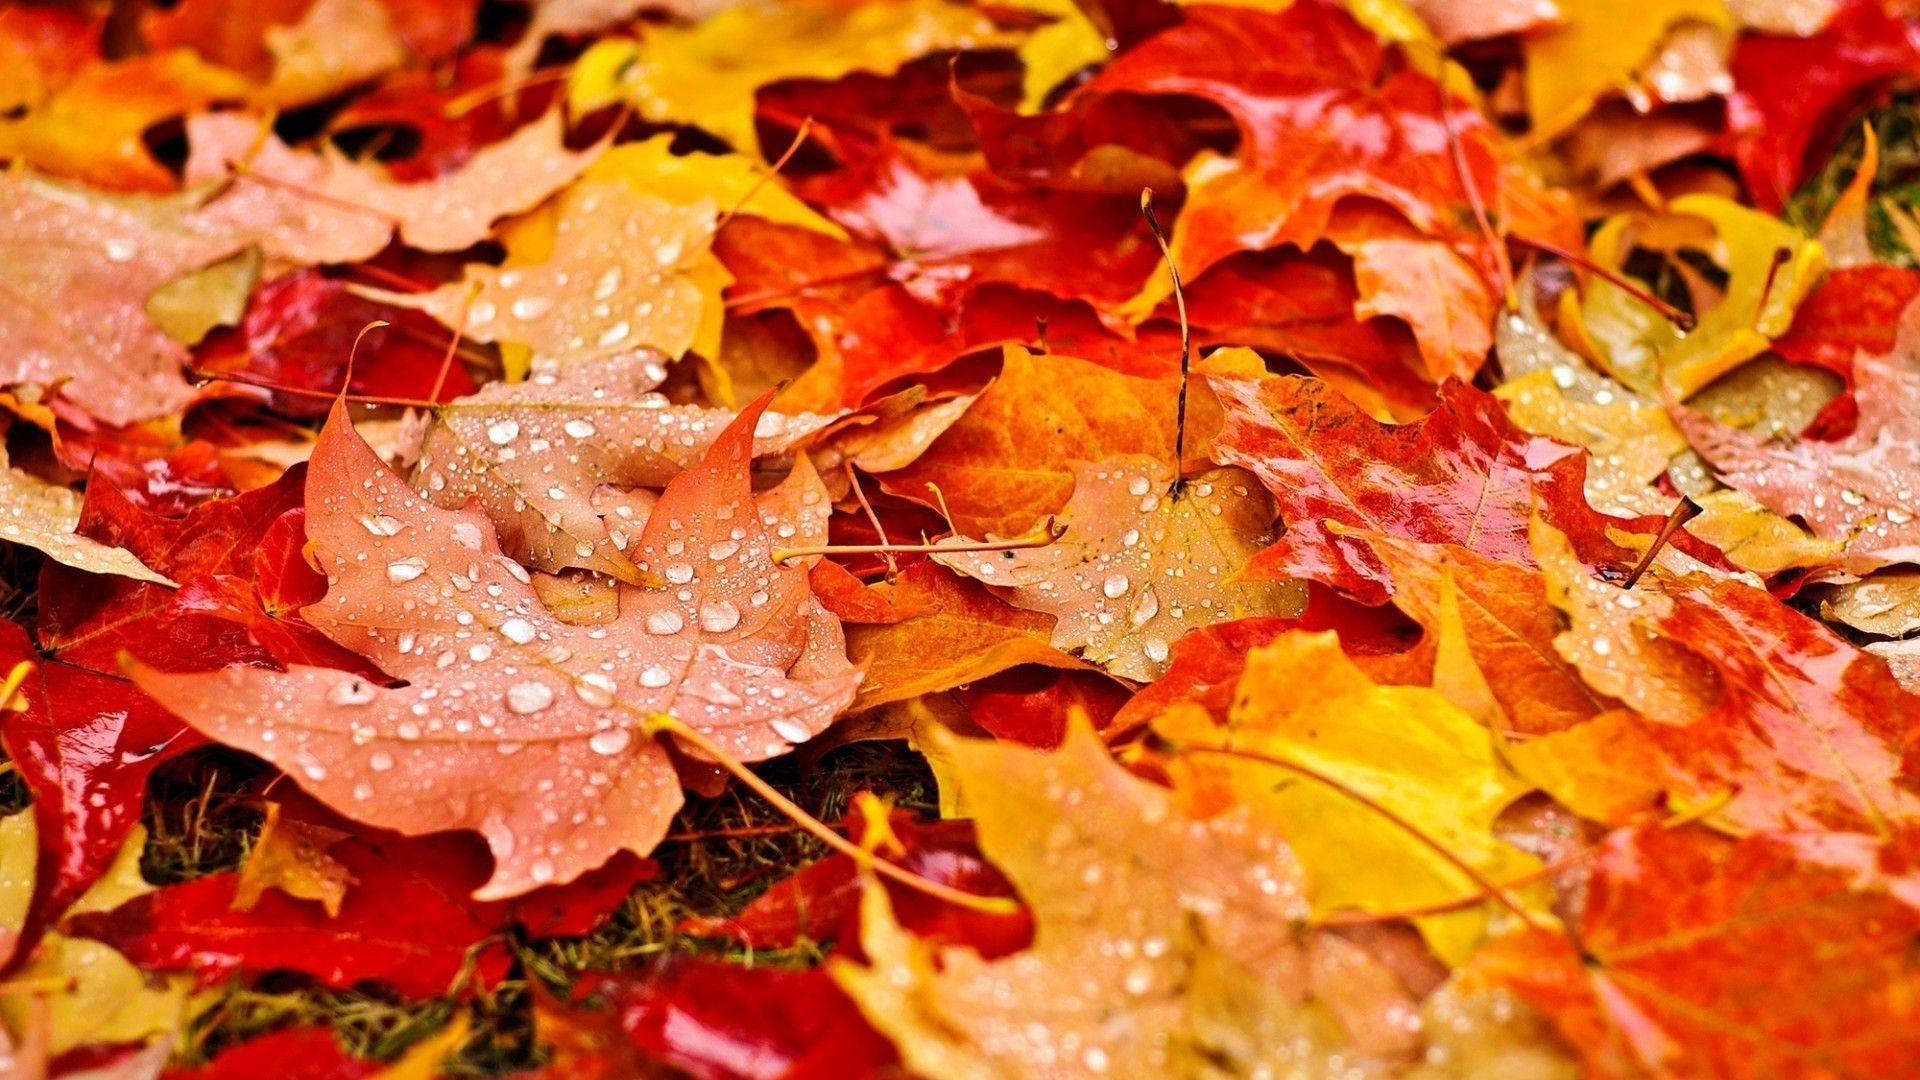 Autumn Leaf Wallpaper (best Autumn Leaf Wallpaper and image) on WallpaperChat